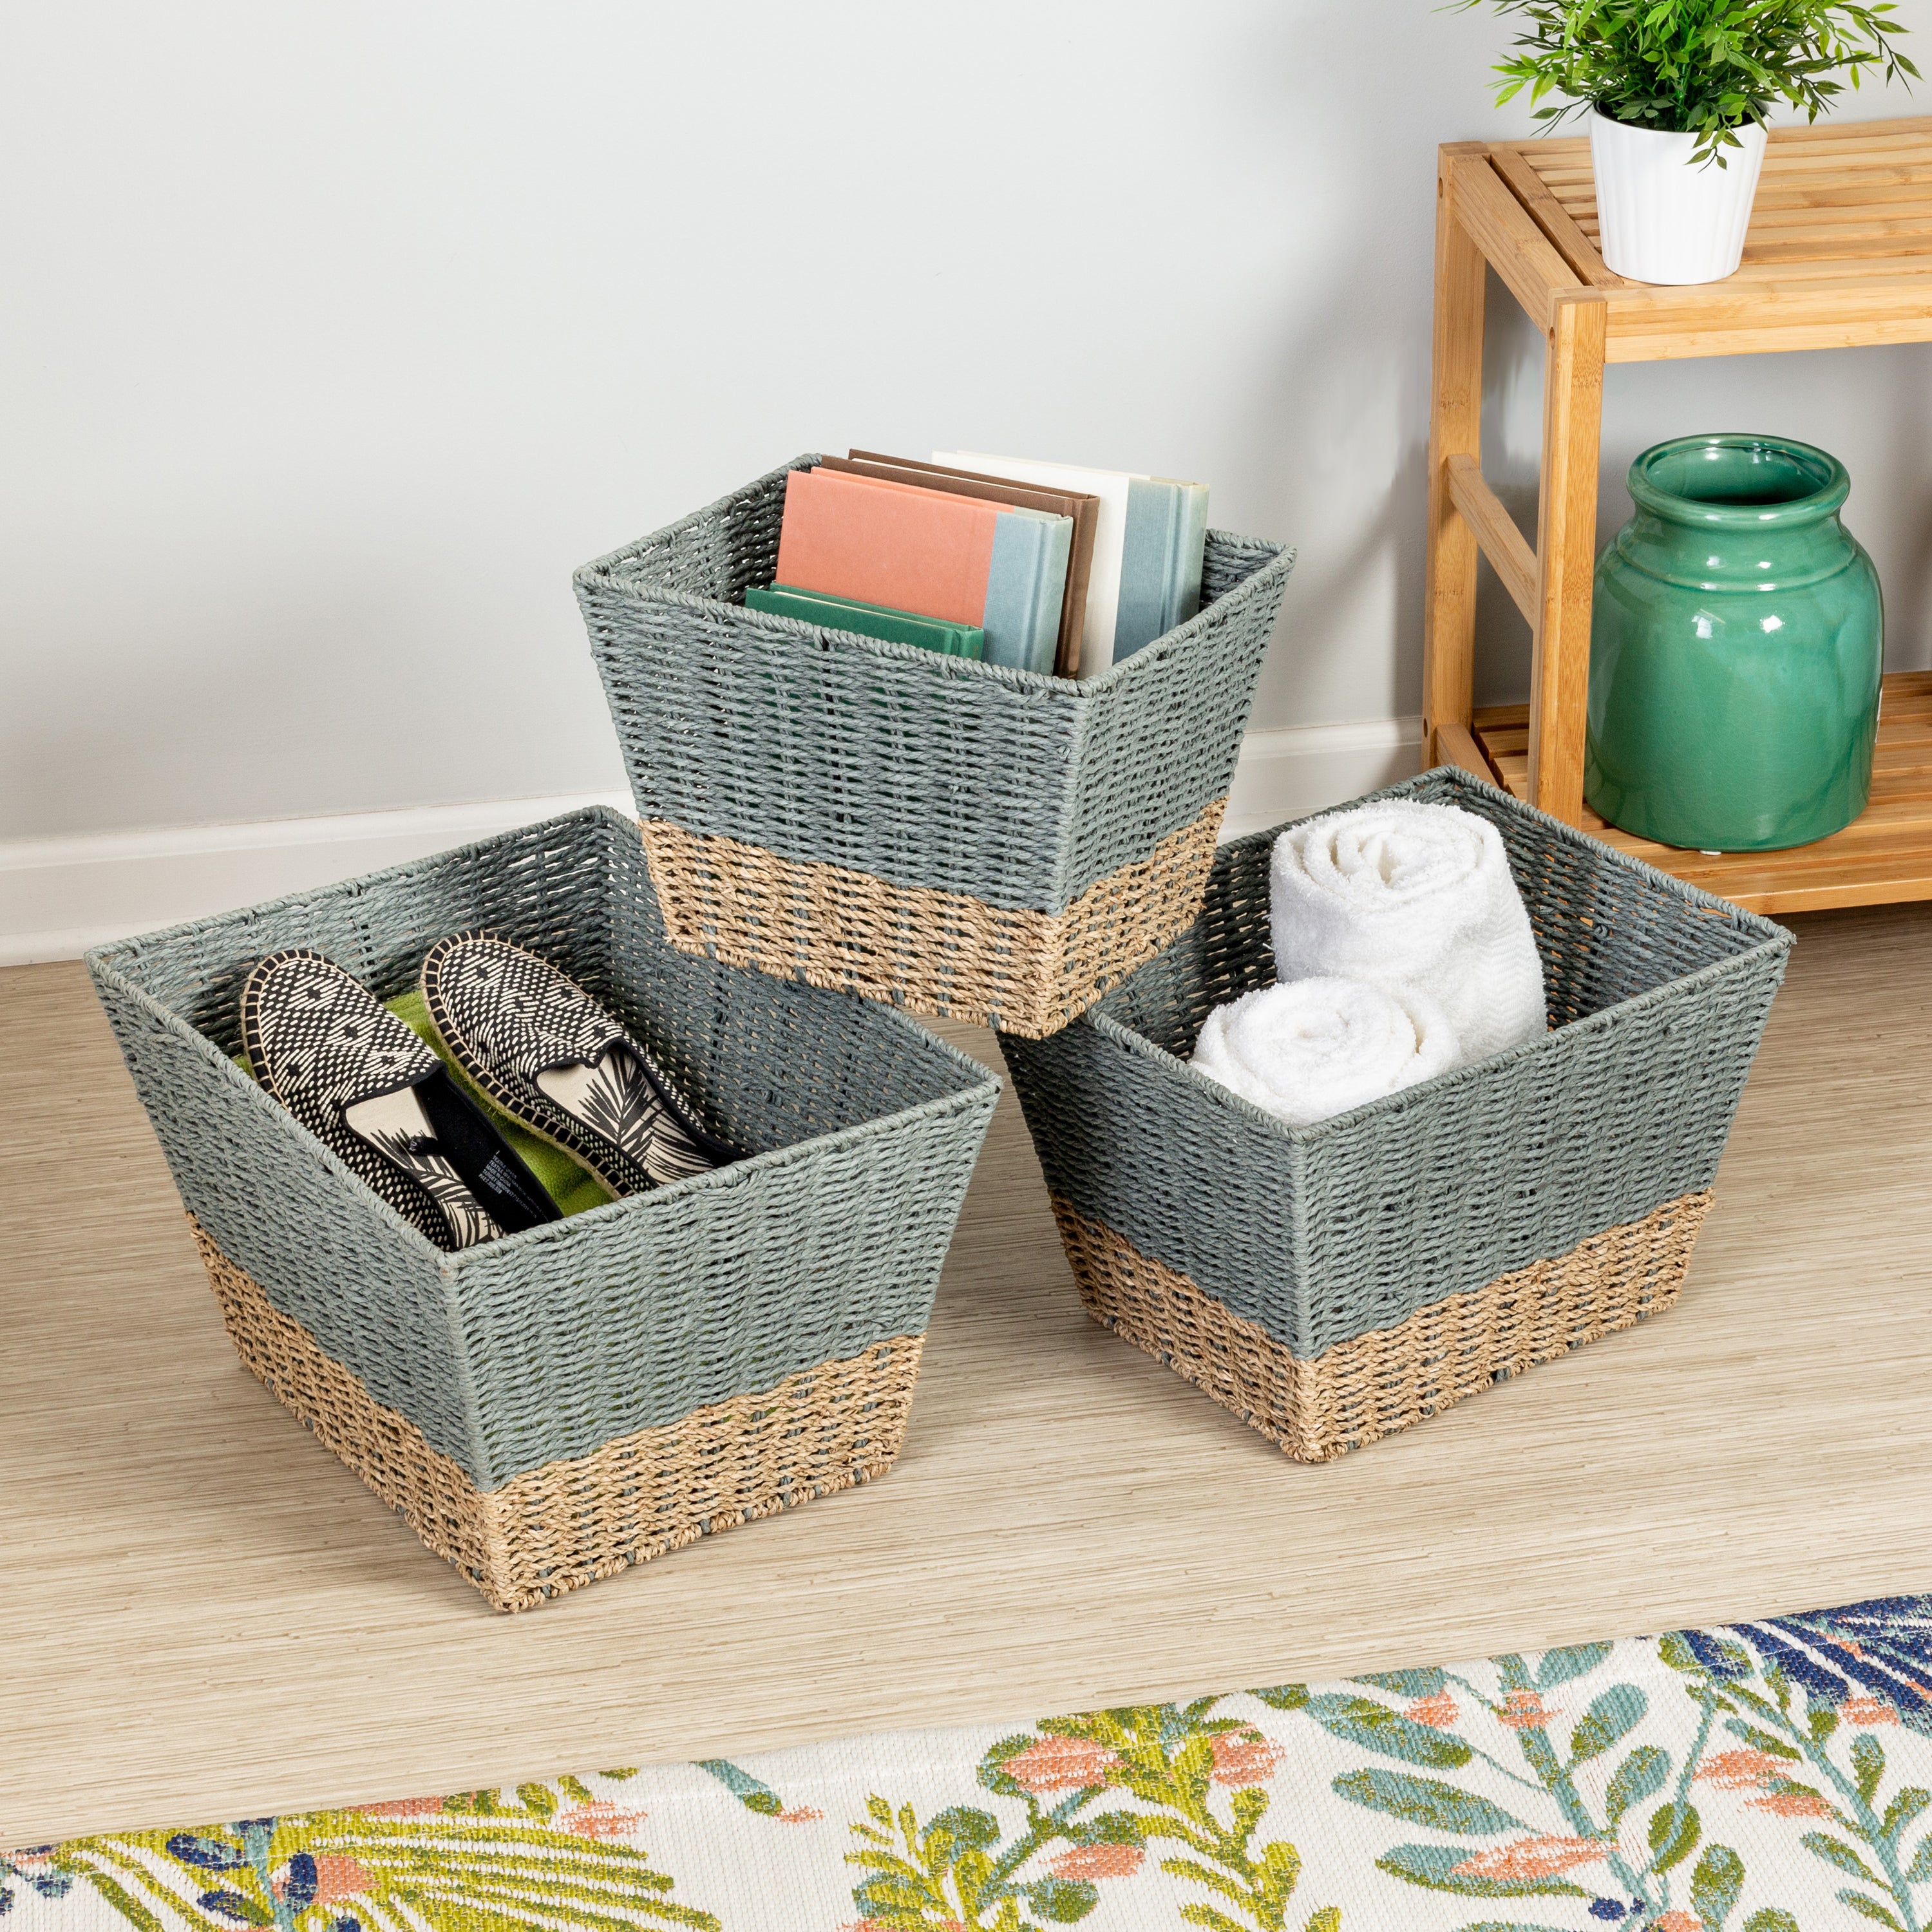 Household Essentials, Natural, Nesting Seagrass Heart Baskets, Set of 2